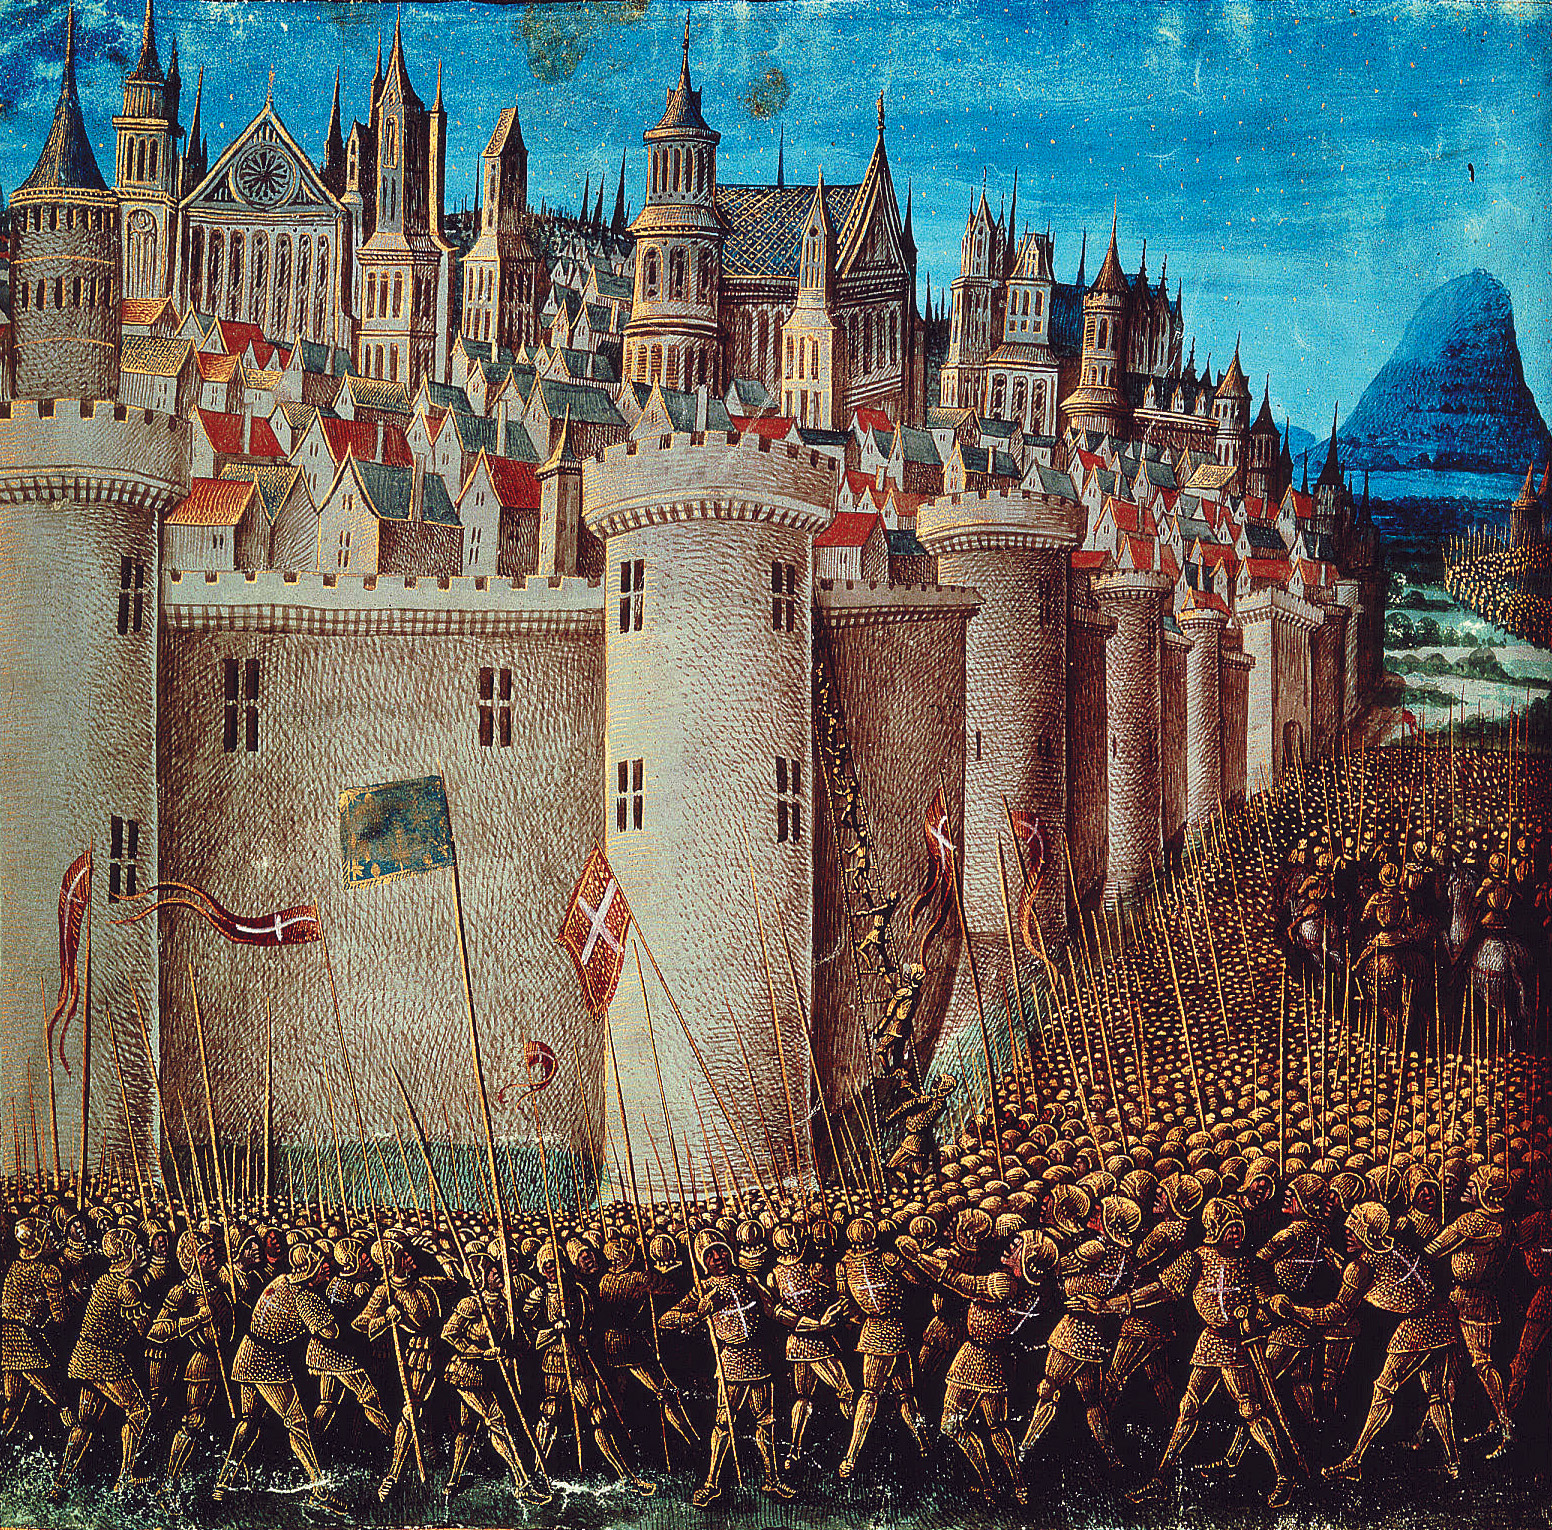 Four hundred years after the siege, the splendor of Antioch and its host of attackers greatly impressed a French manuscript artist. The painter also showed the scaling of the tower wall. 